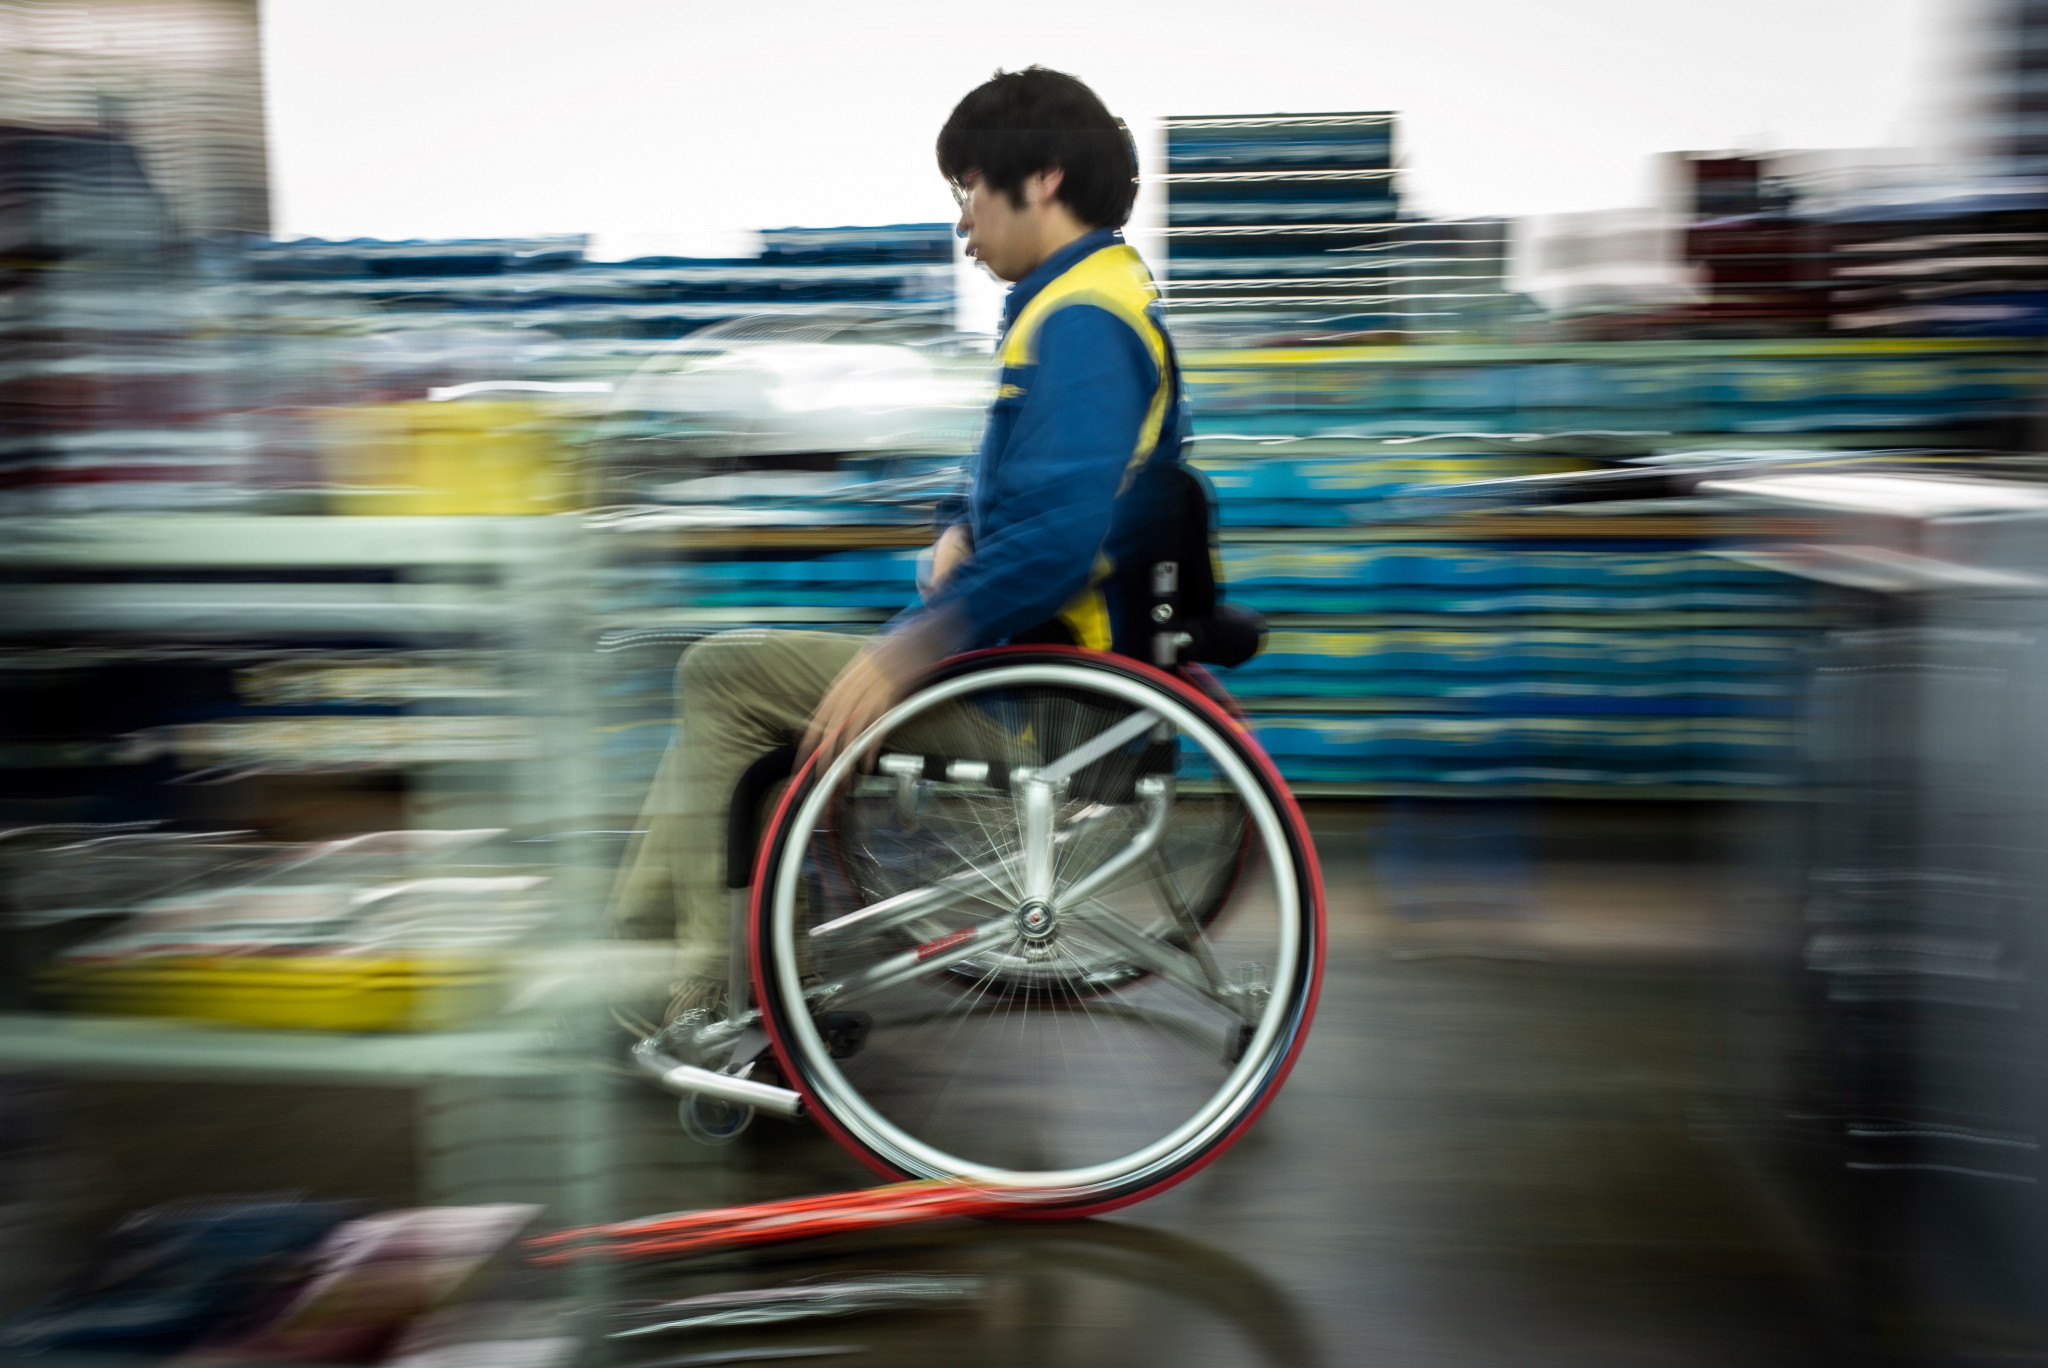 The company helps disabled people find employment ©Getty Images